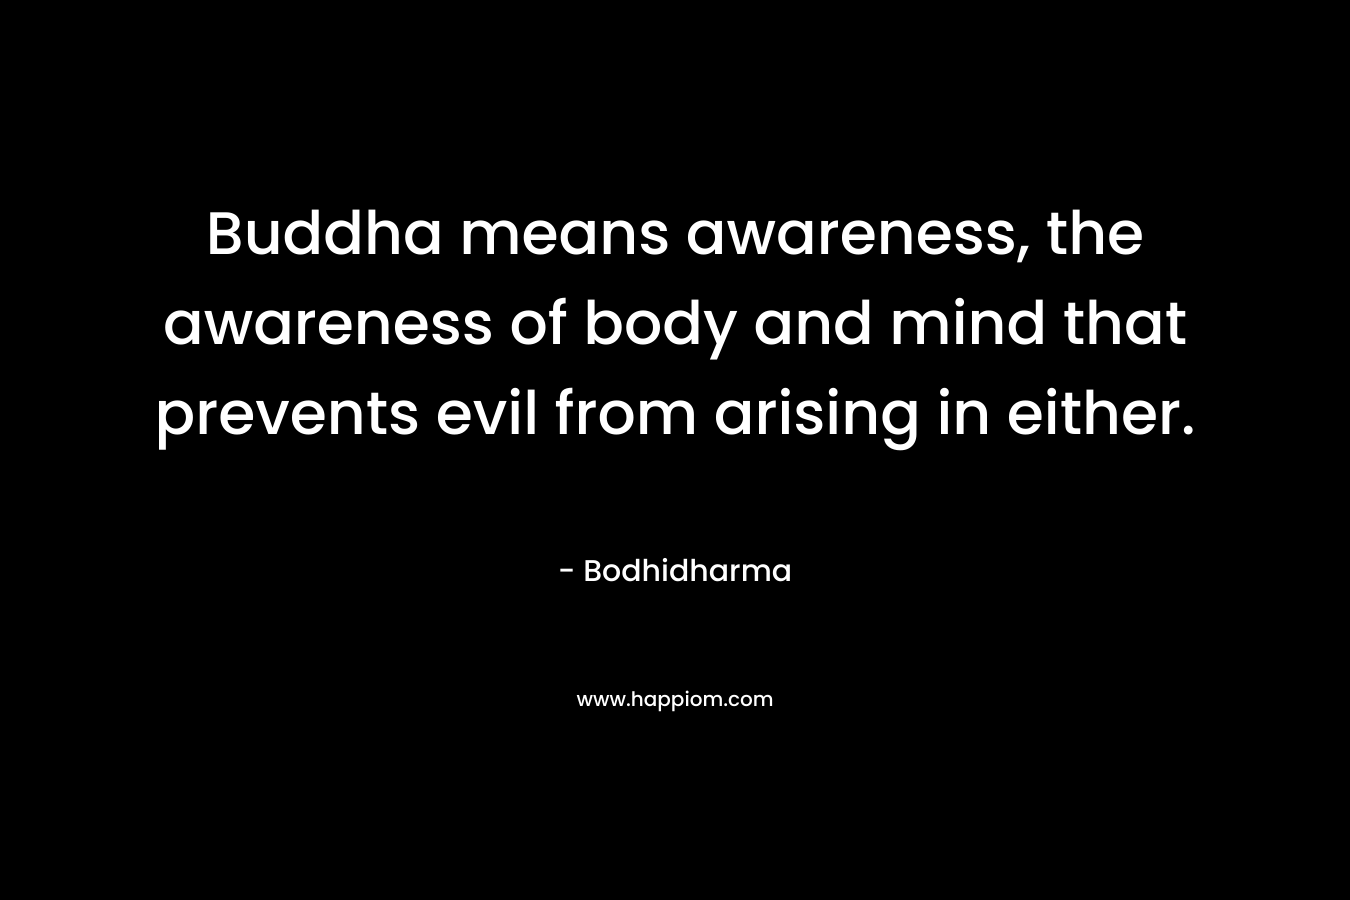 Buddha means awareness, the awareness of body and mind that prevents evil from arising in either.